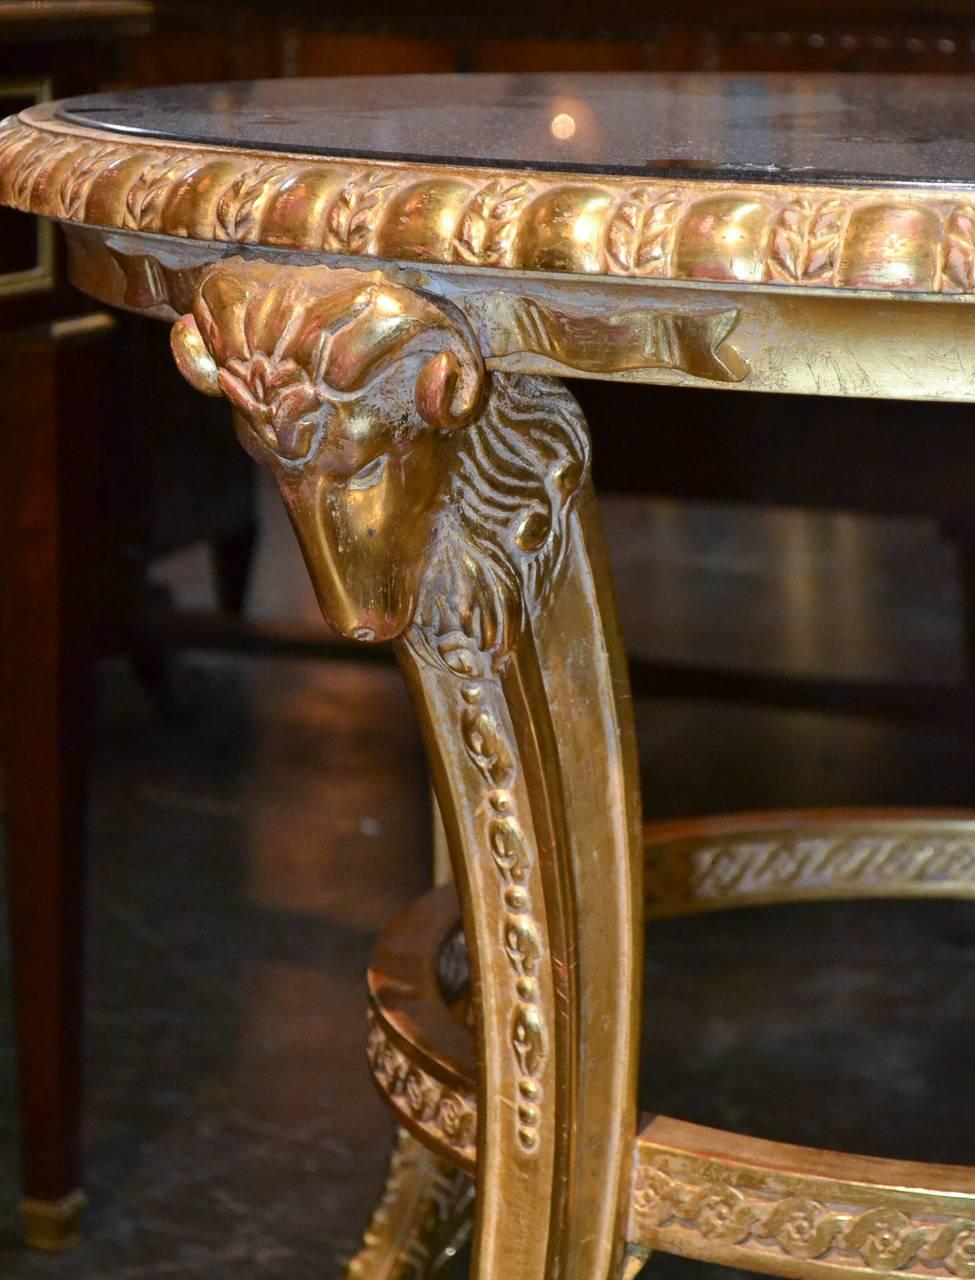 Sensational pair of French neoclassical carved giltwood side tables. Having lovely carved rams head legs terminating in cloven feet, matching black granite tops, and exhibiting beautiful lustrous patinas. Wonderful for numerous designs!